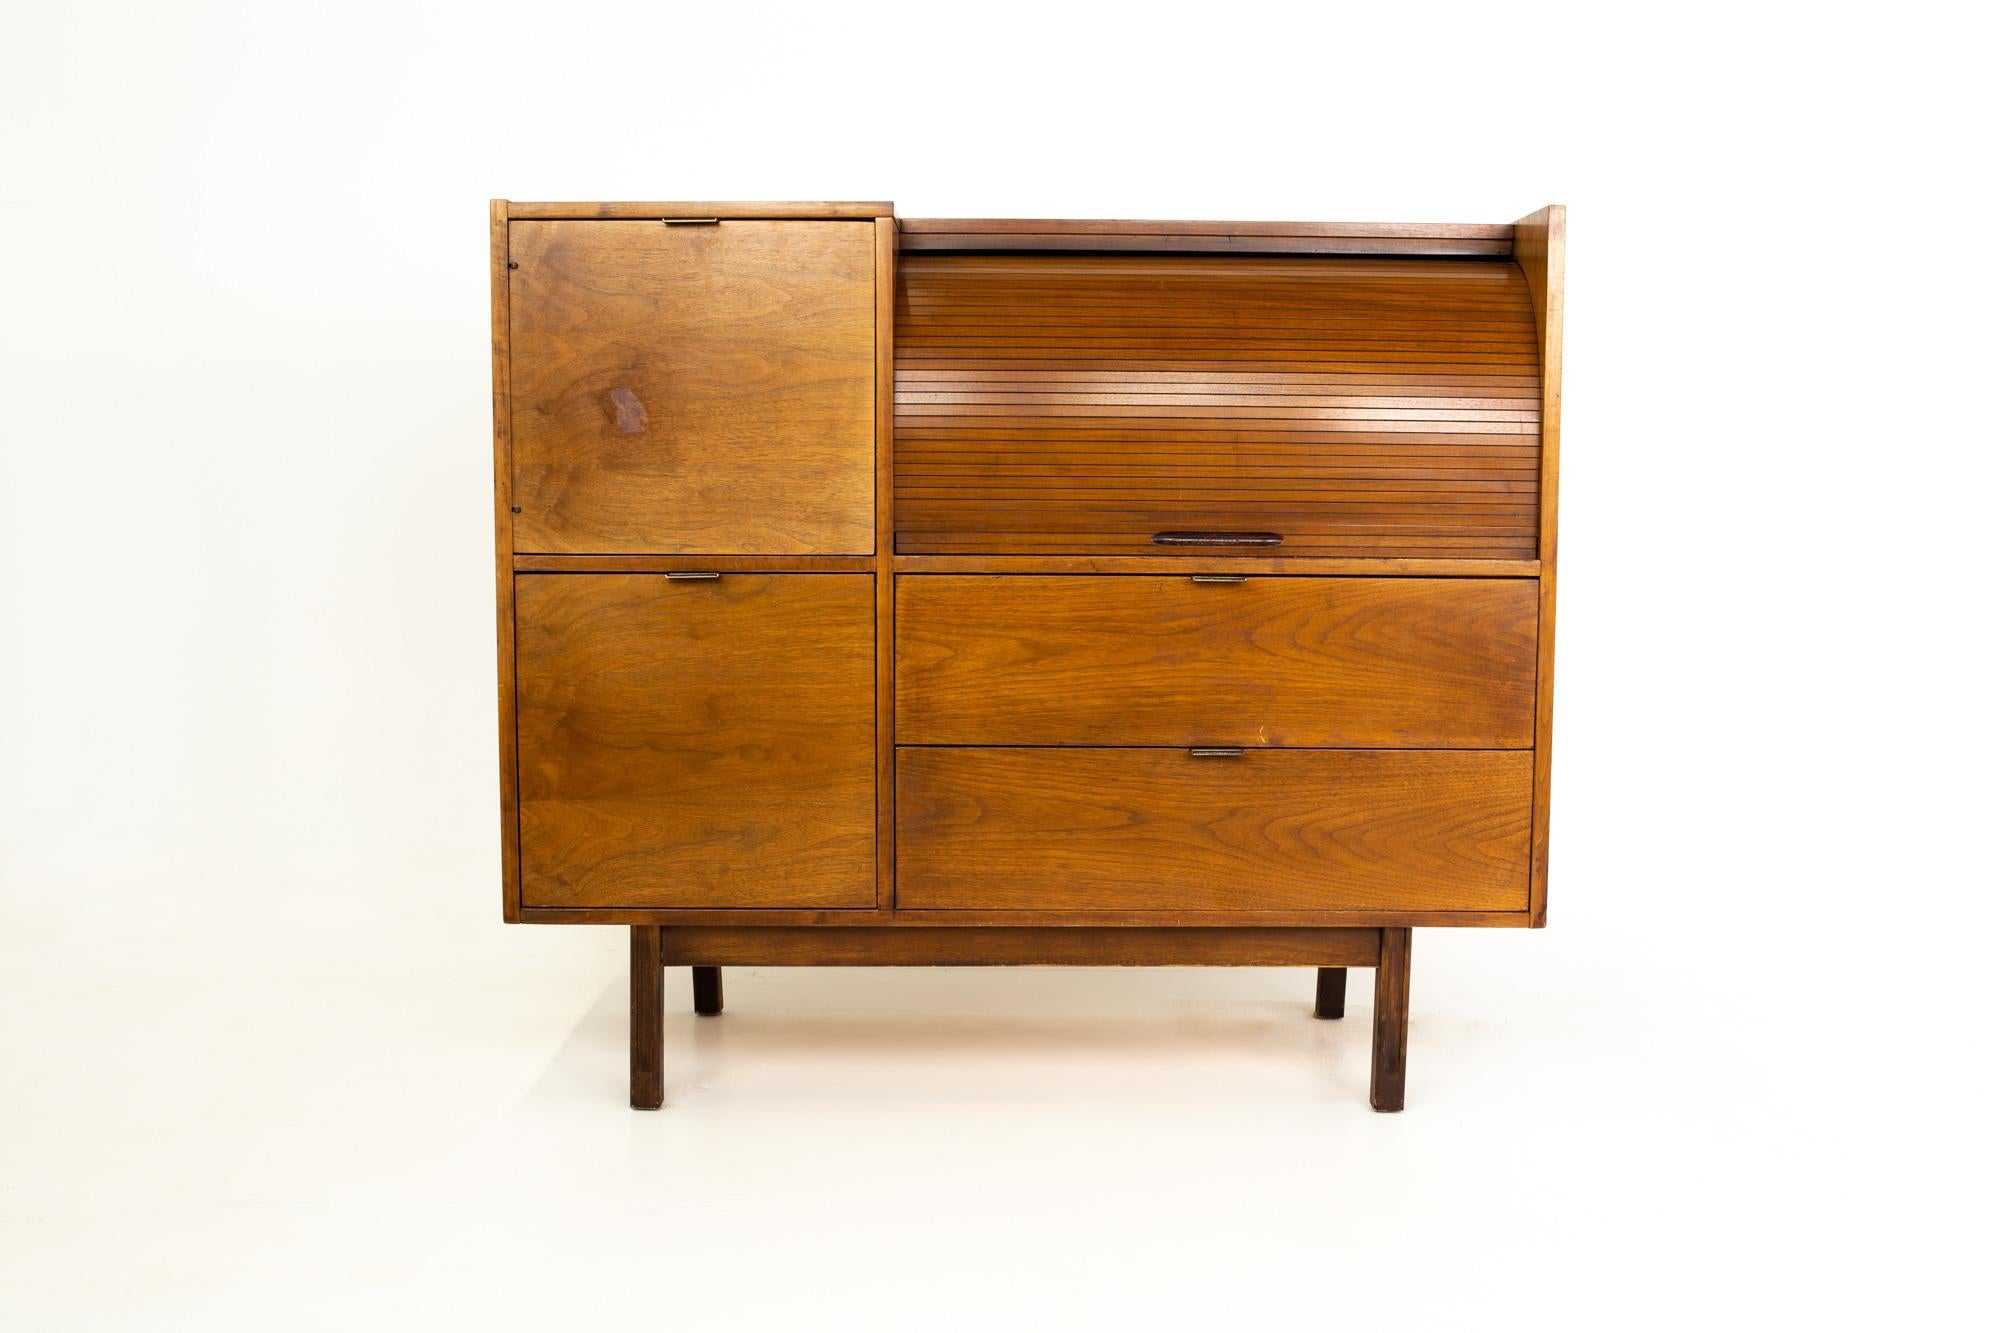 Mainline by Hooker Mid Century walnut roll top secretary desk.
Desk measures: 49.75 wide x 20 deep x 43.5.

Each piece is available in what we call restored vintage condition. That means the piece is permanently fixed upon purchase so it’s free of